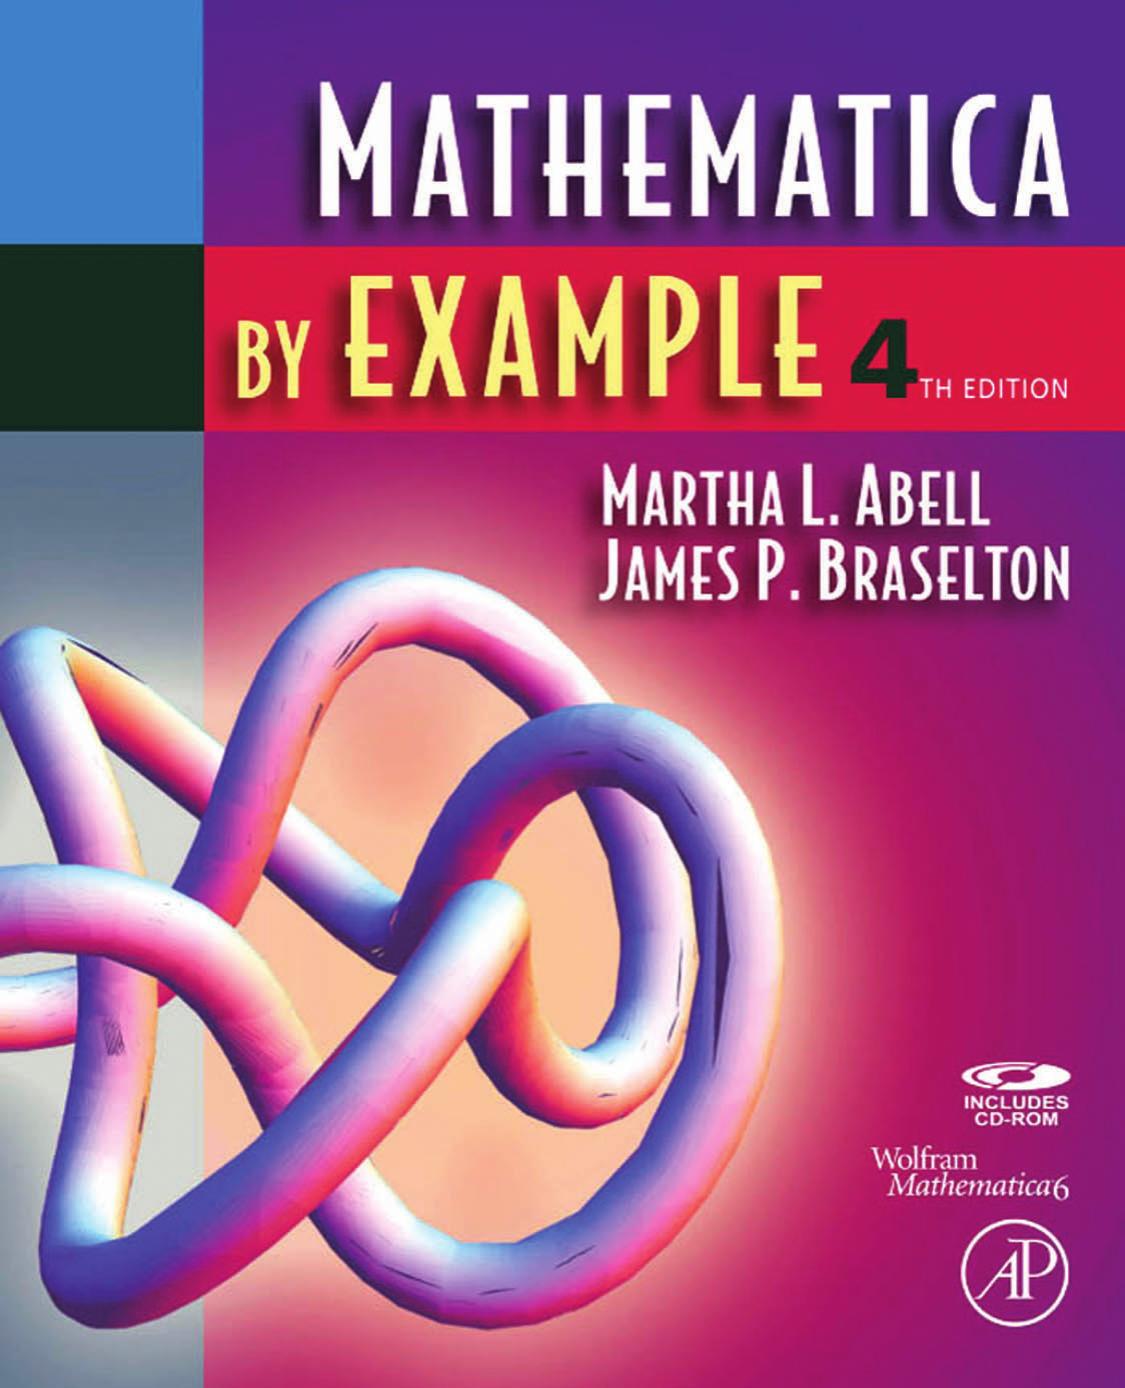 Mathematica® by Example 4th Edition